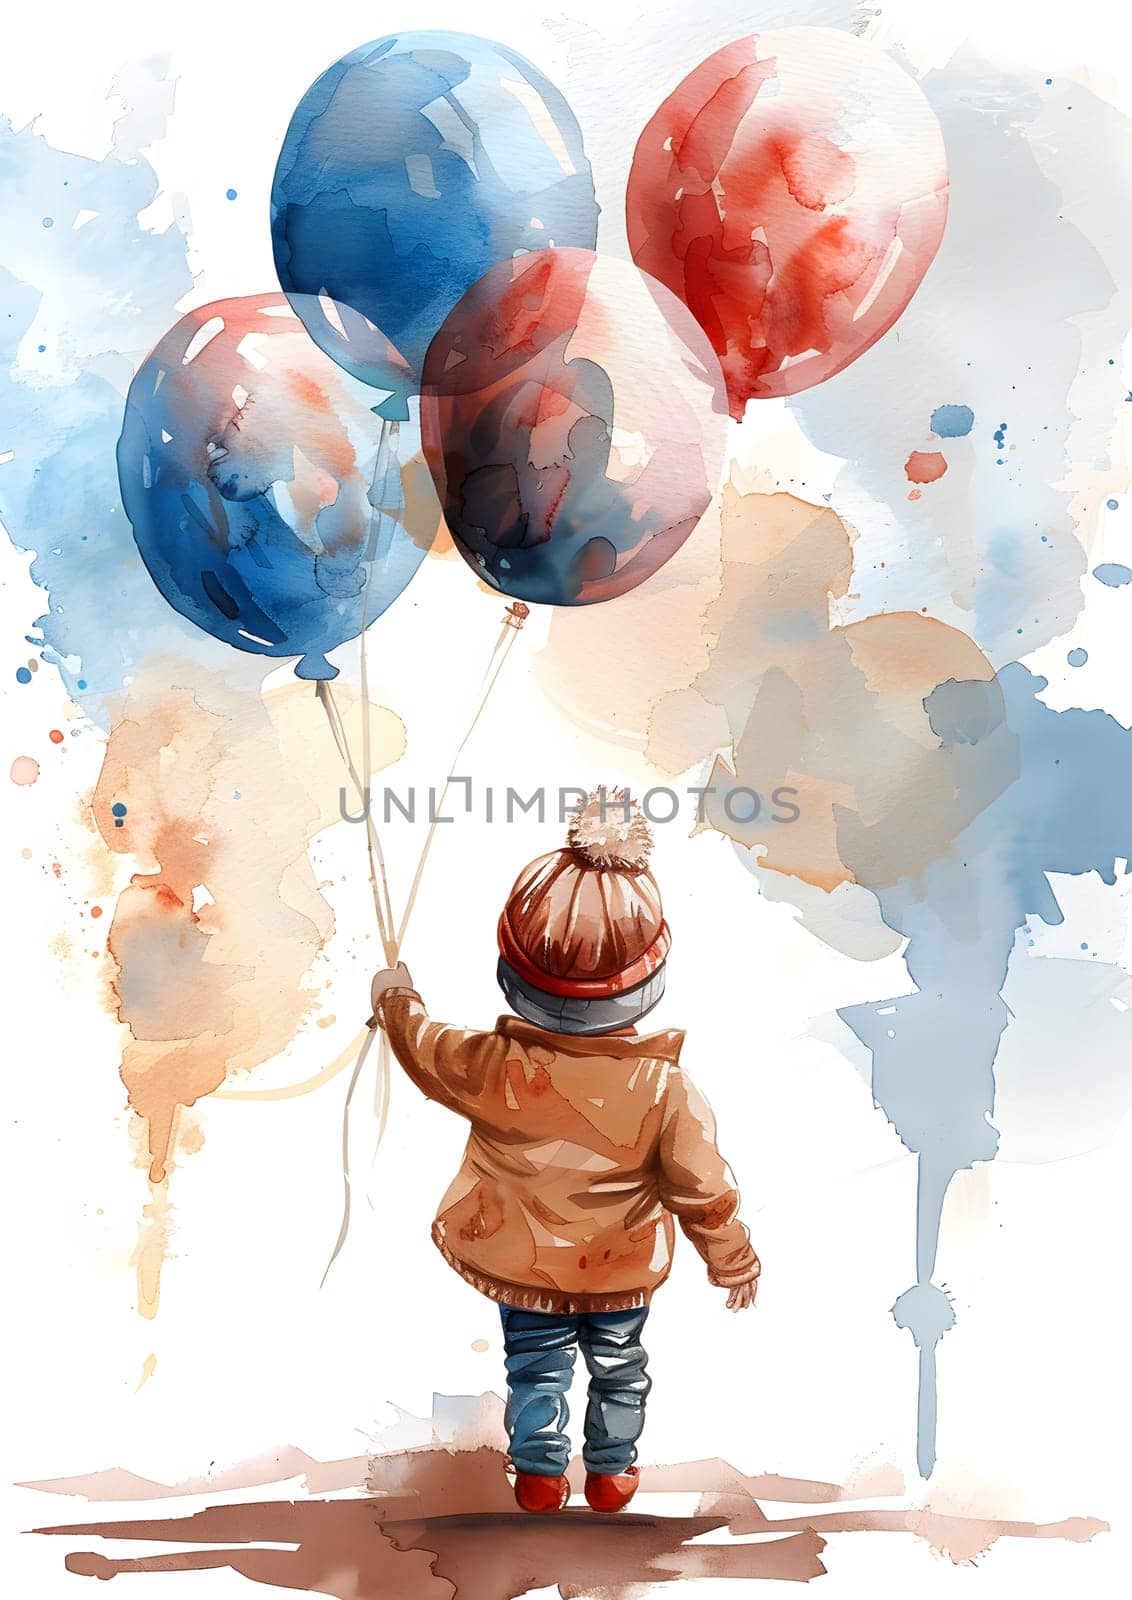 A watercolor art piece of a toddler happily holding colorful balloons. The joyful gesture captures the essence of a party supply event in nature